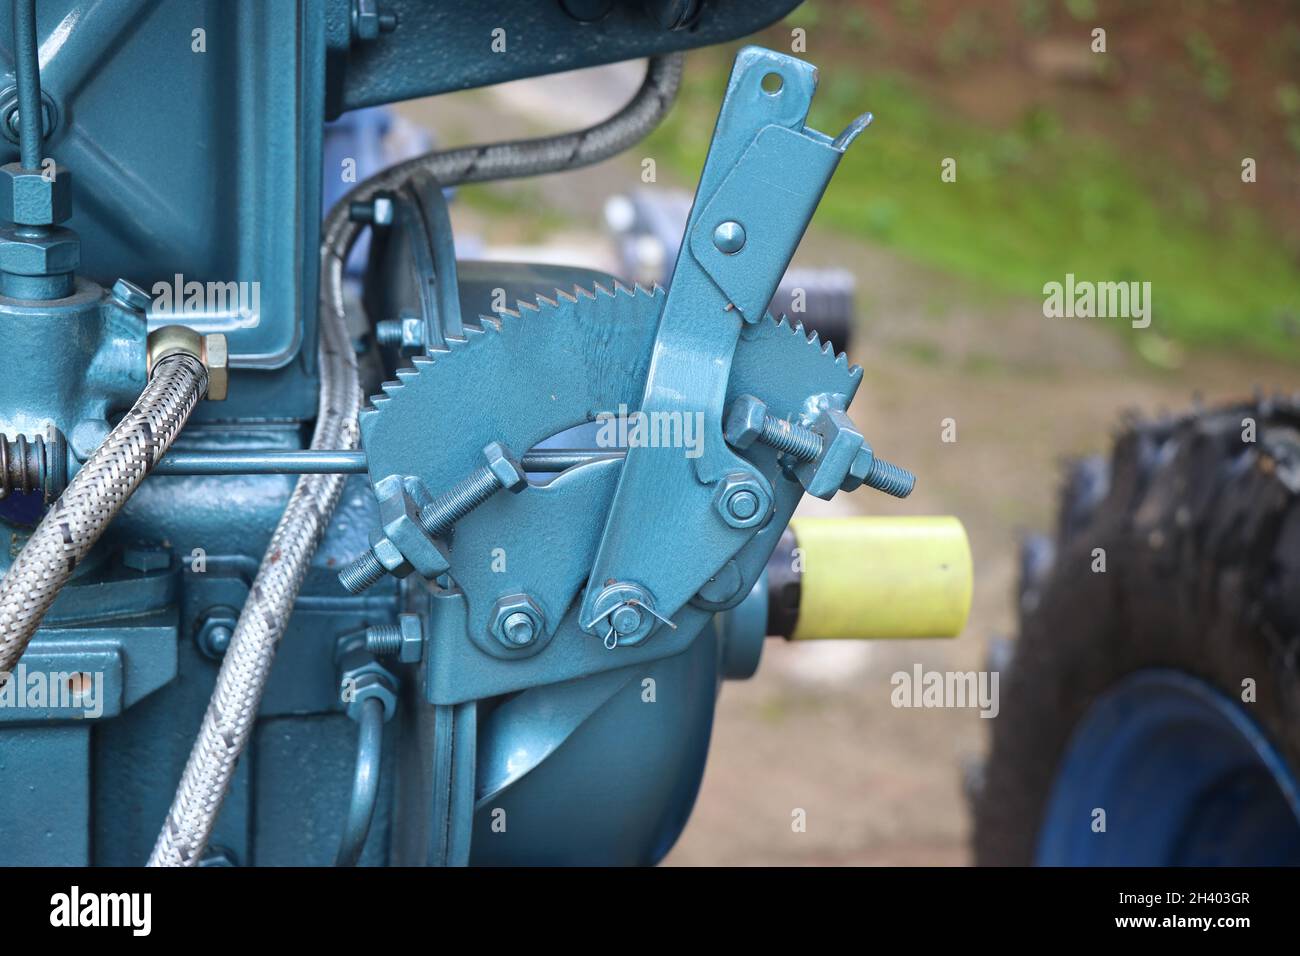 Speed regulation lever of water pump Diesel engine, Handle to control the speed of diesel engines for different purposes Stock Photo